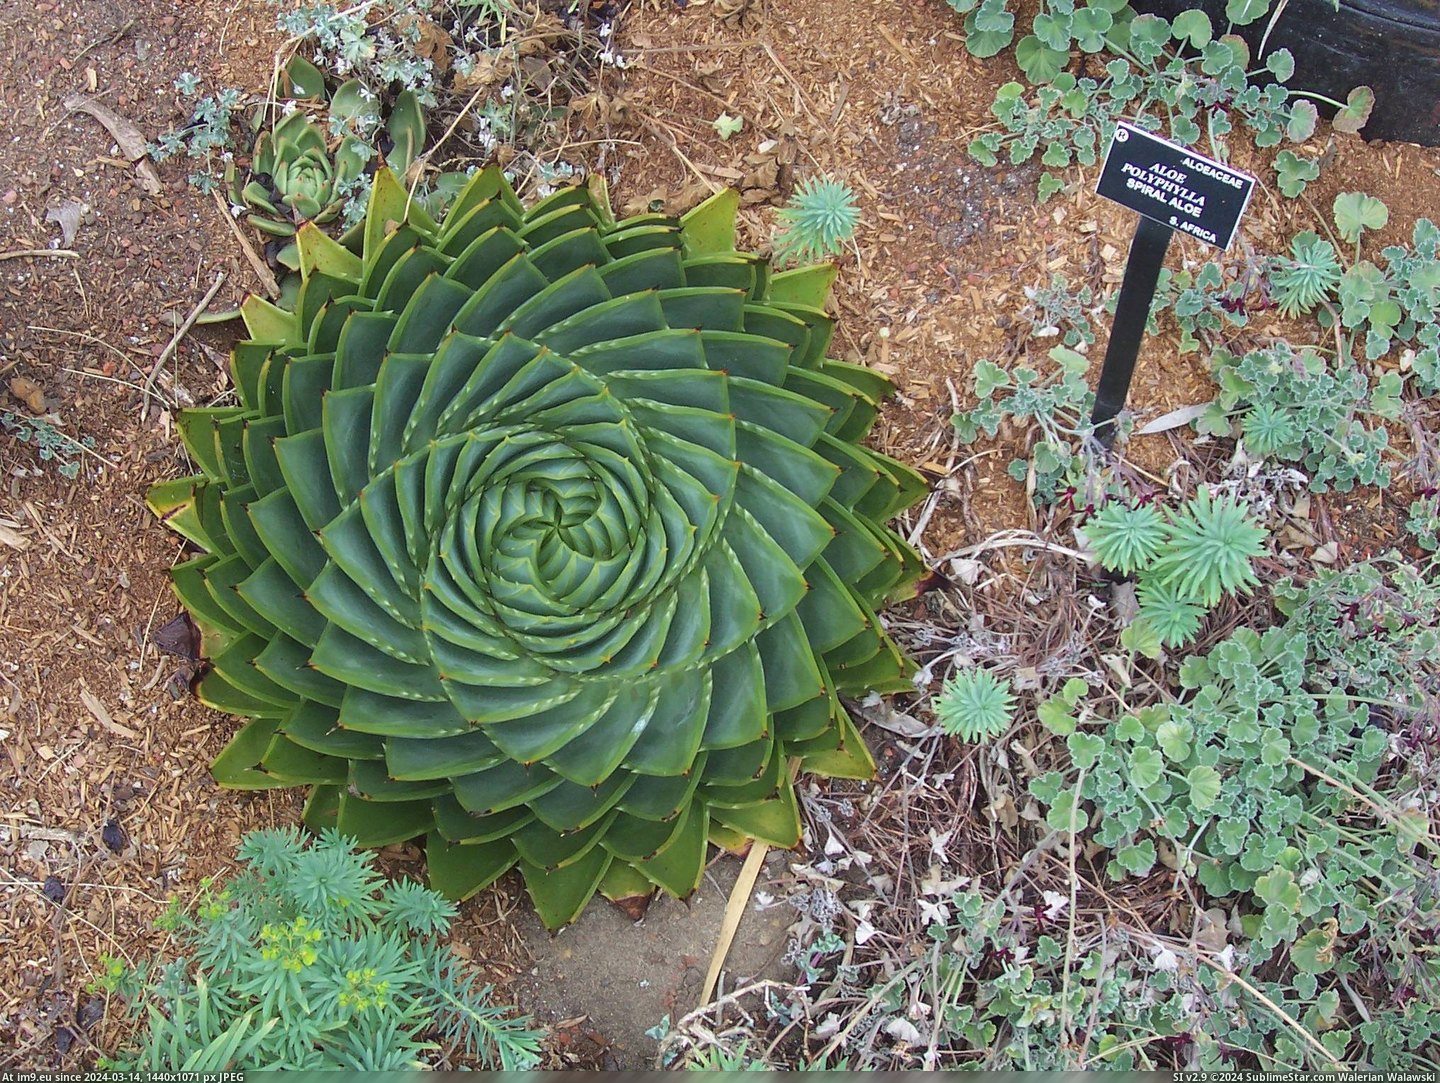 [Pics] The Aloe polyphylla plant (in My r/PICS favs)